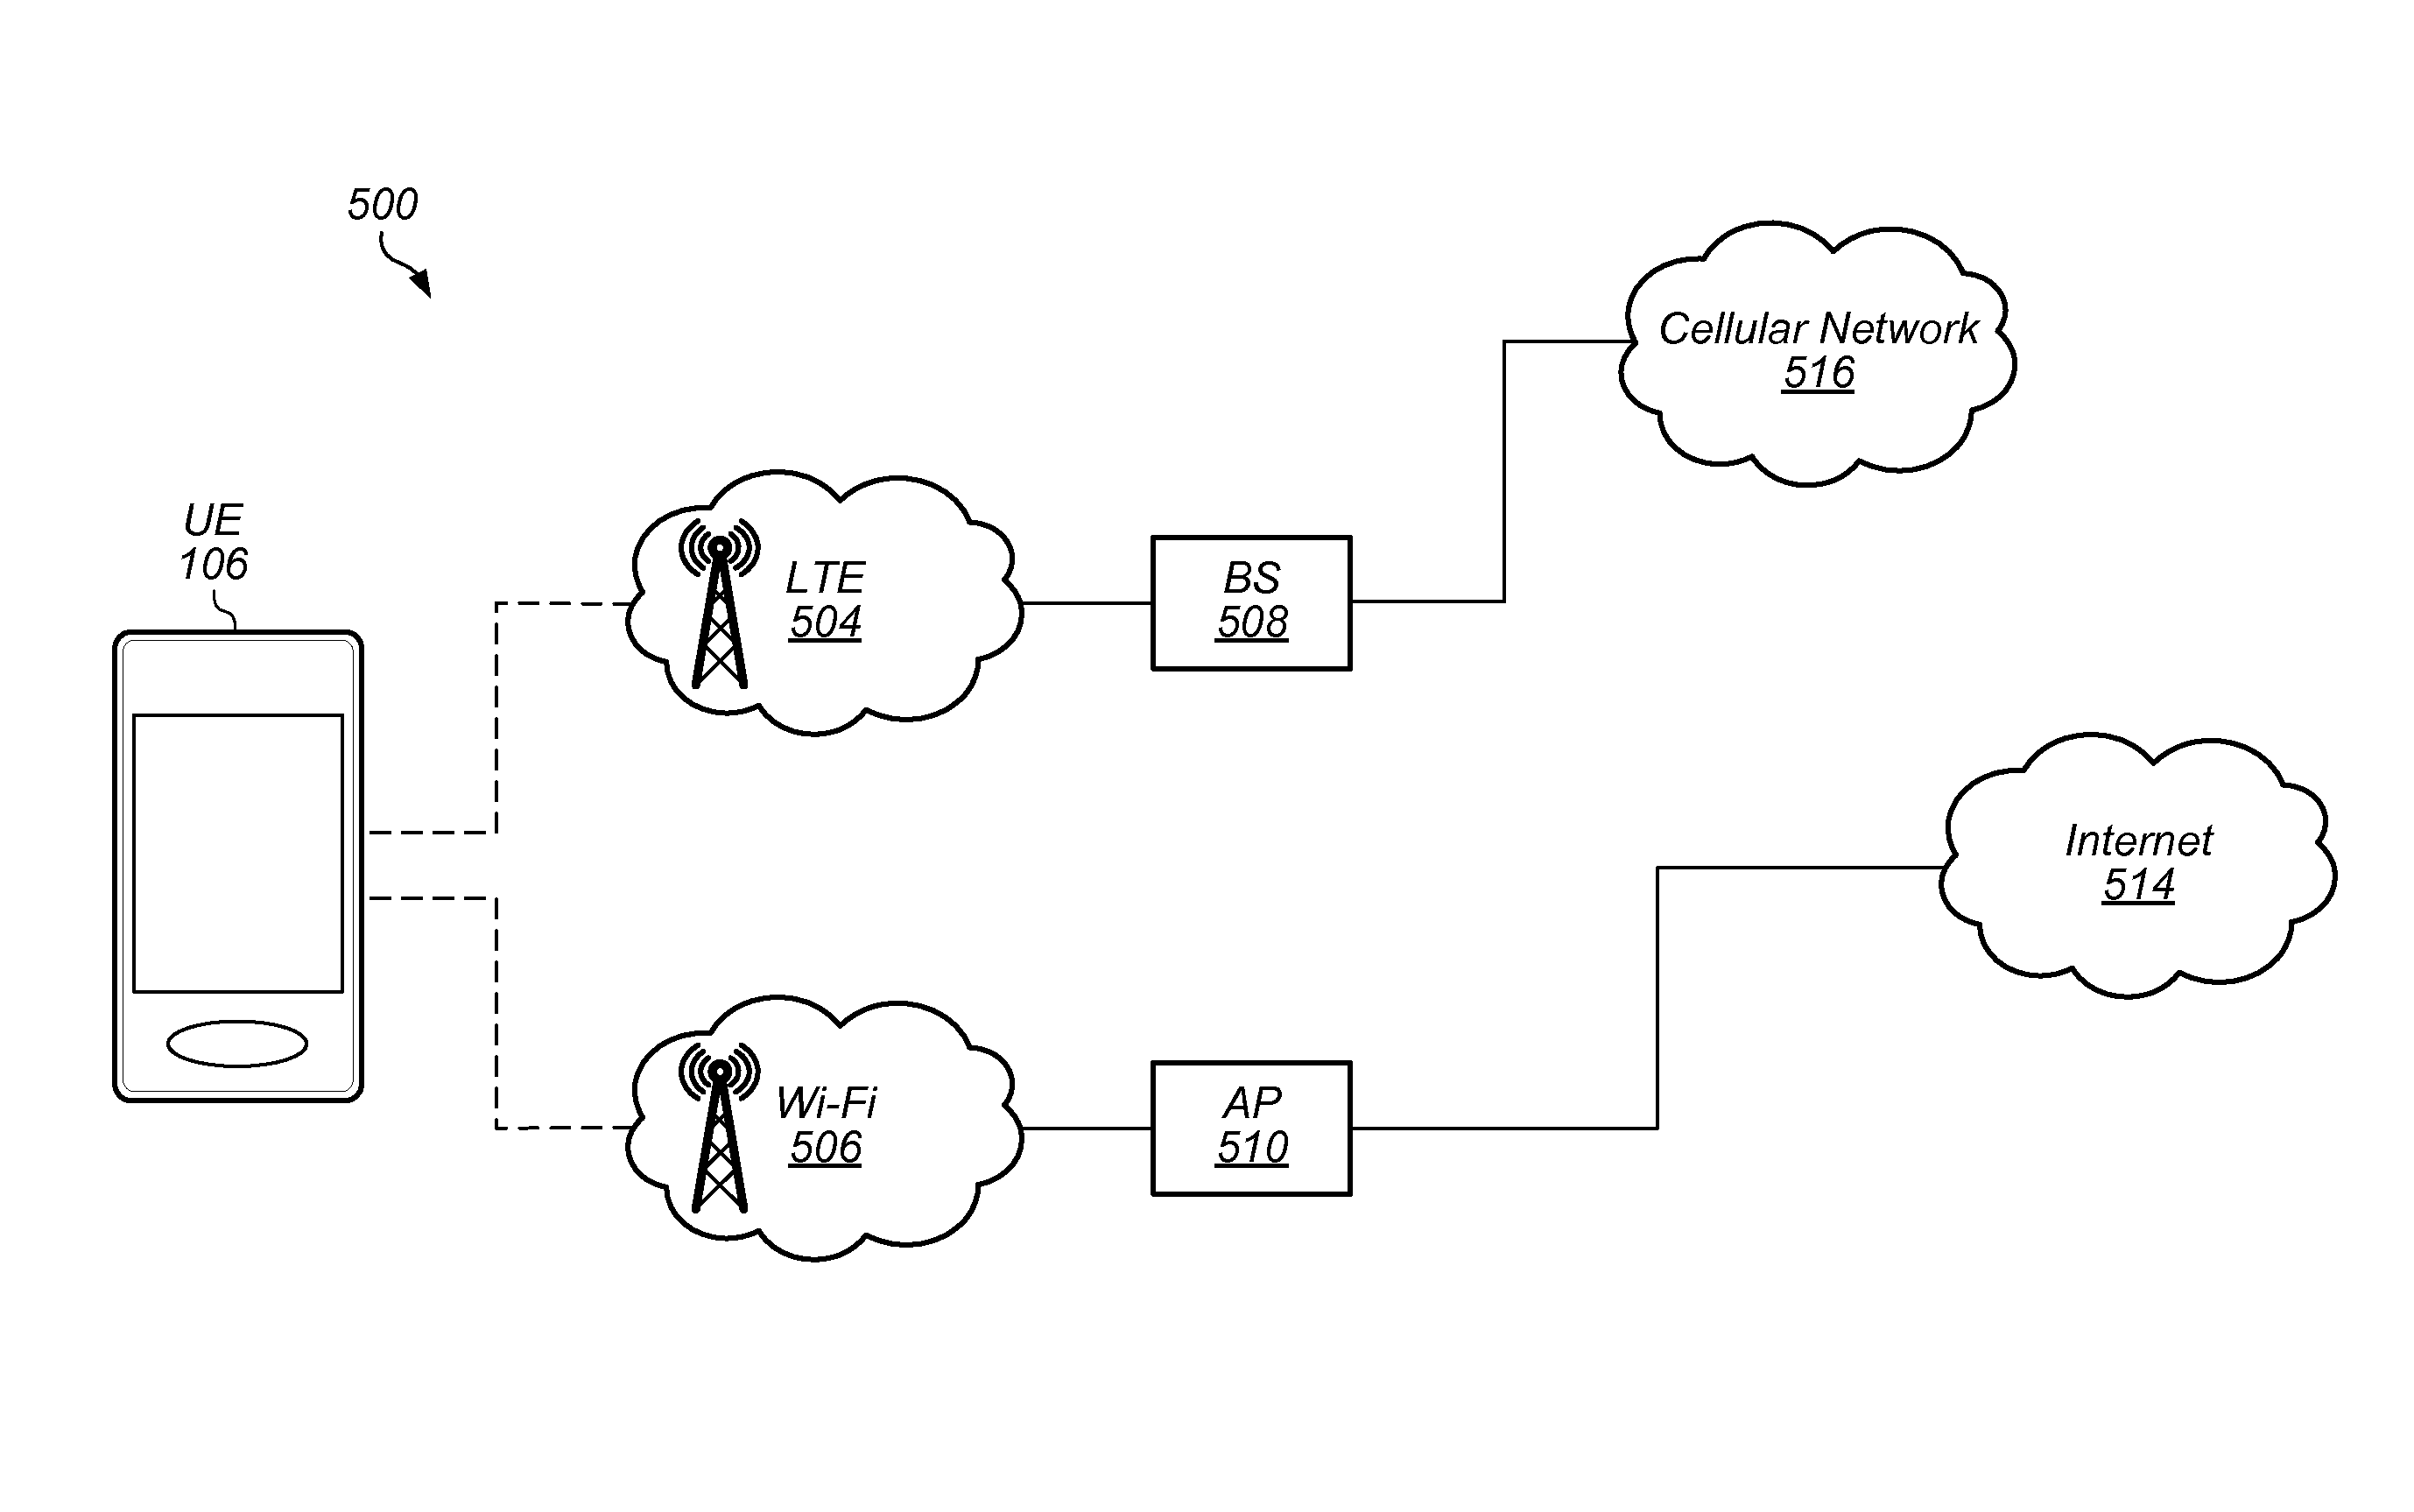 Application-Aware Multiple Wireless Radio-Access Technology Coexistence Solution and Time Sharing Between Multiple Radio-Access Technologies for In-Device Coexistence